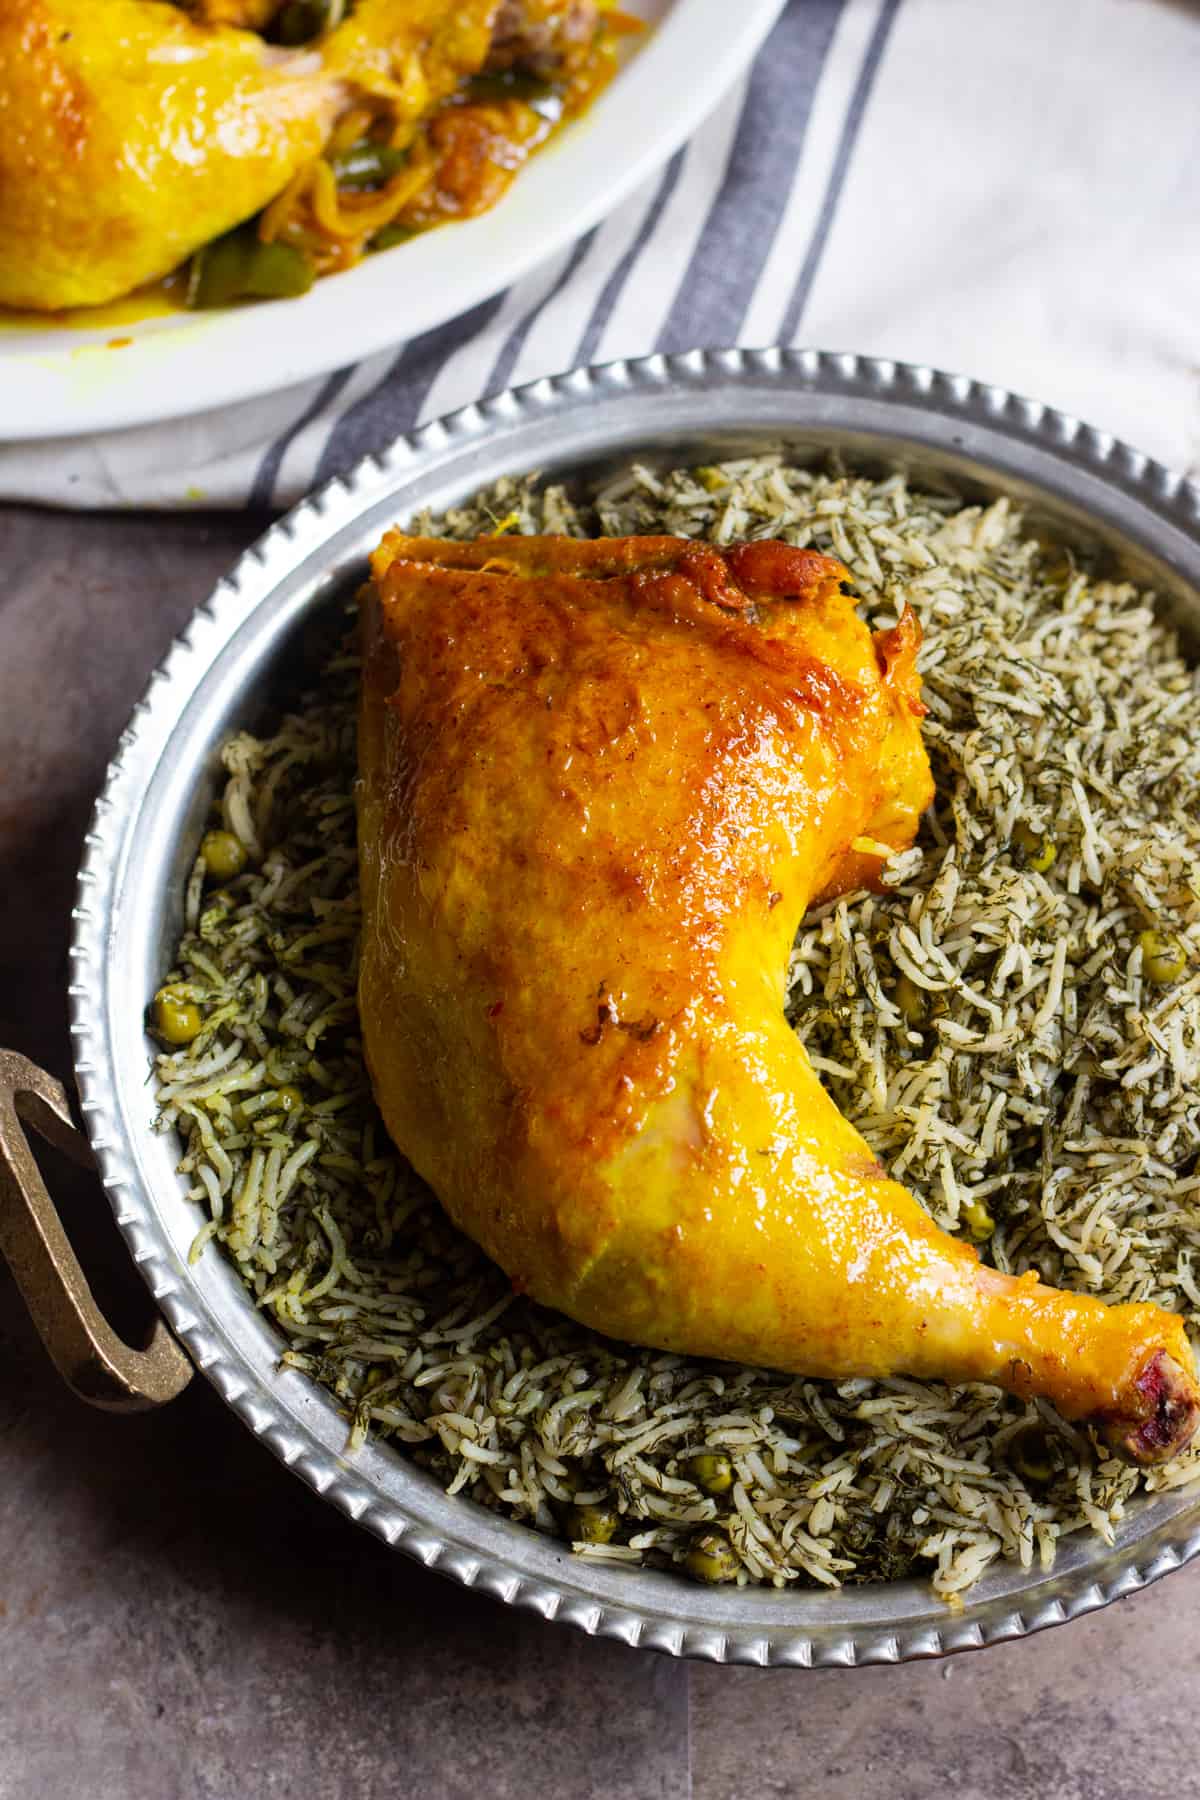 You can serve Dill rice and peas with Persian saffron chicken.